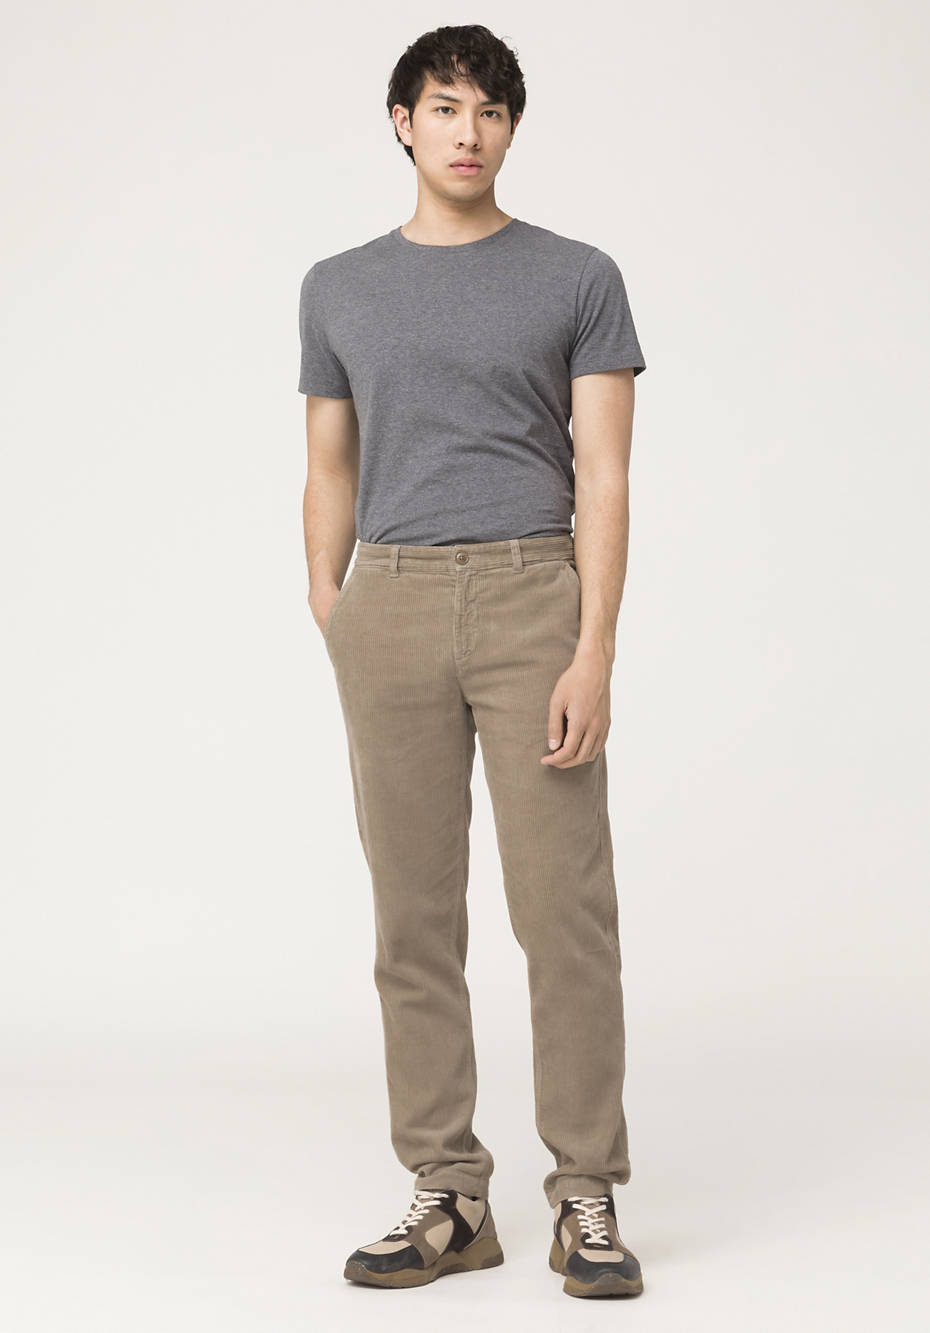 Corduroy trousers made of hemp with organic cotton